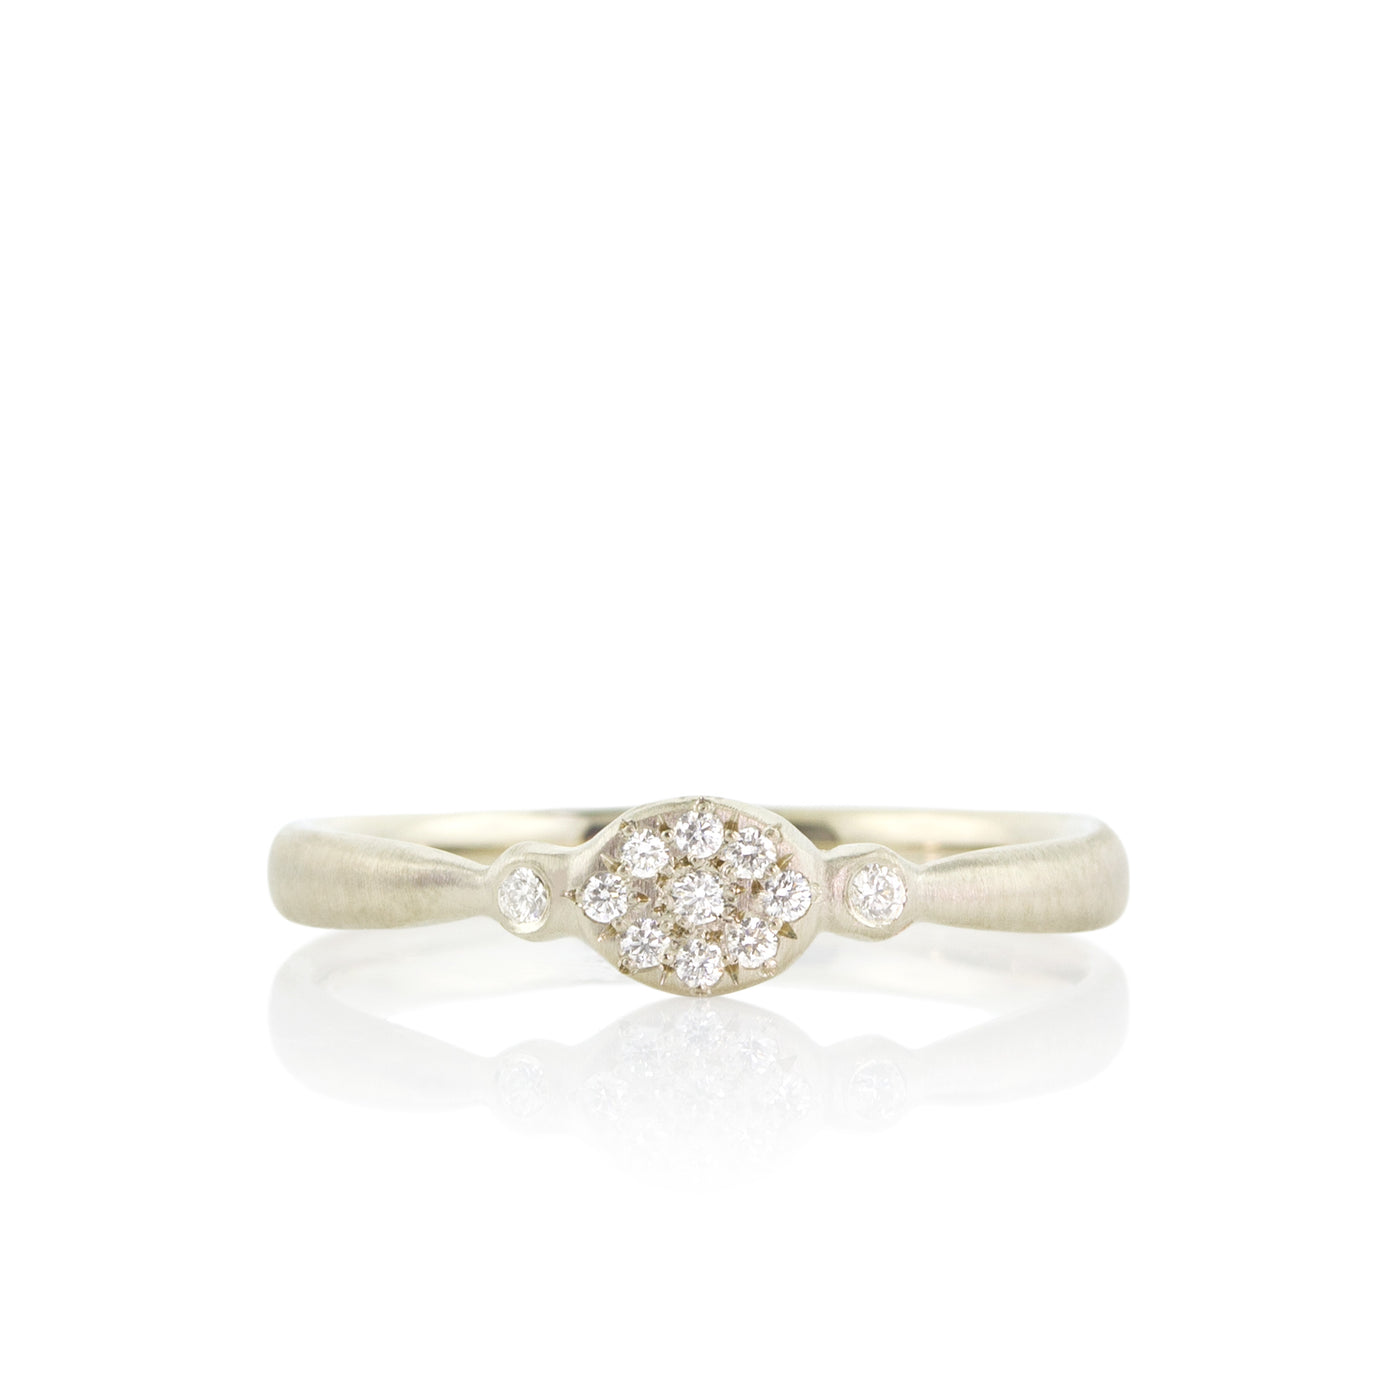 OVAL FLORET CHARM RING